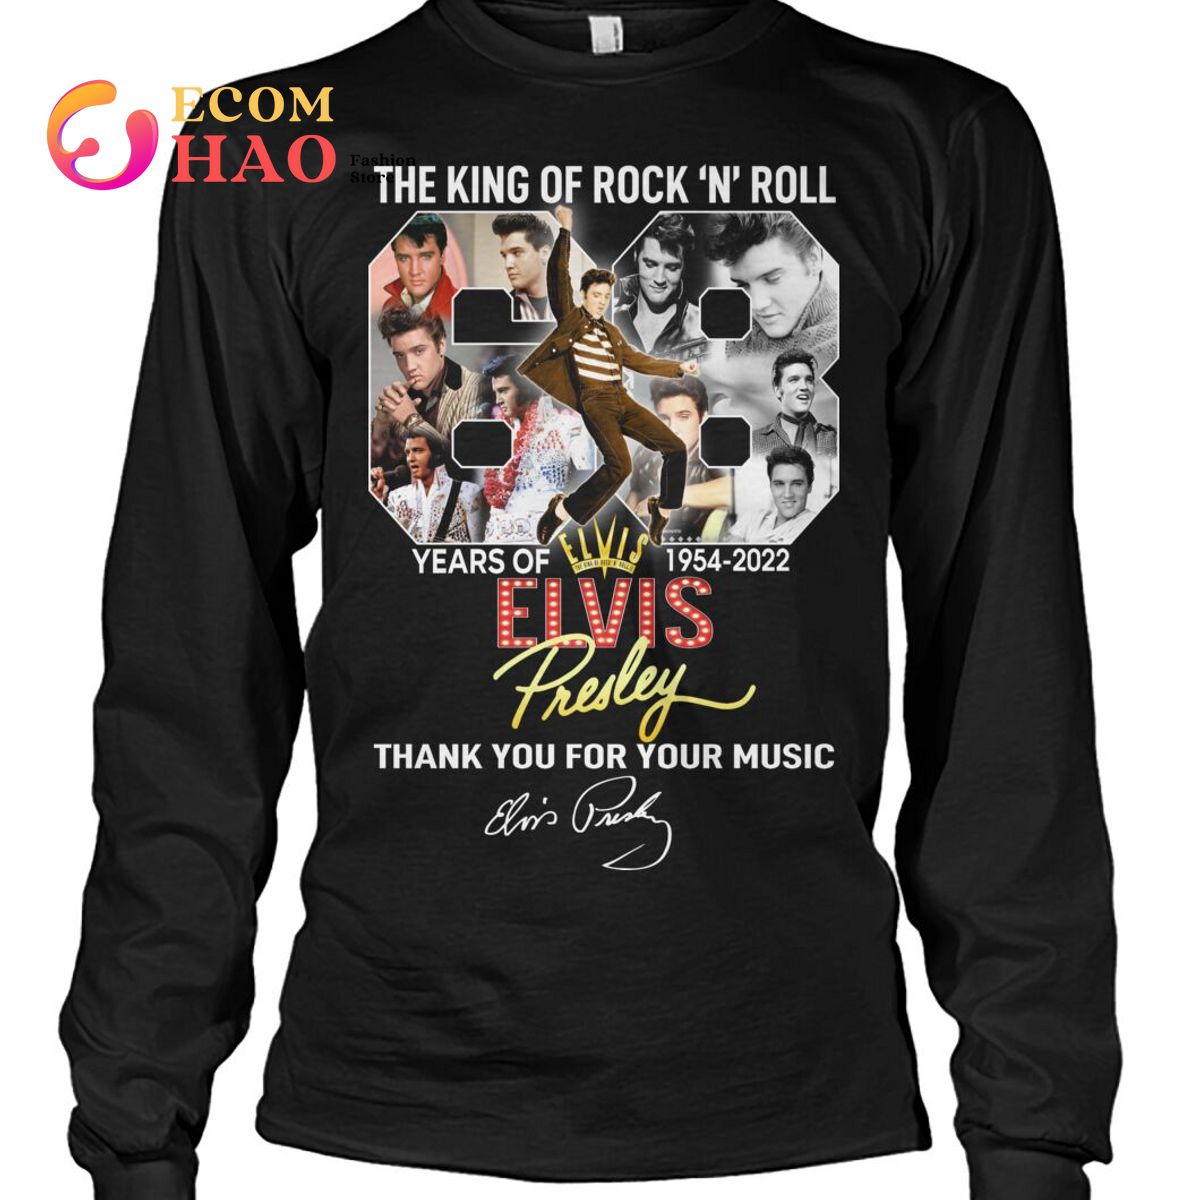 The King Of Rock 'N' Rool Year Of 1954-2022 Elvis Presley Thank You For Music T-Shirt